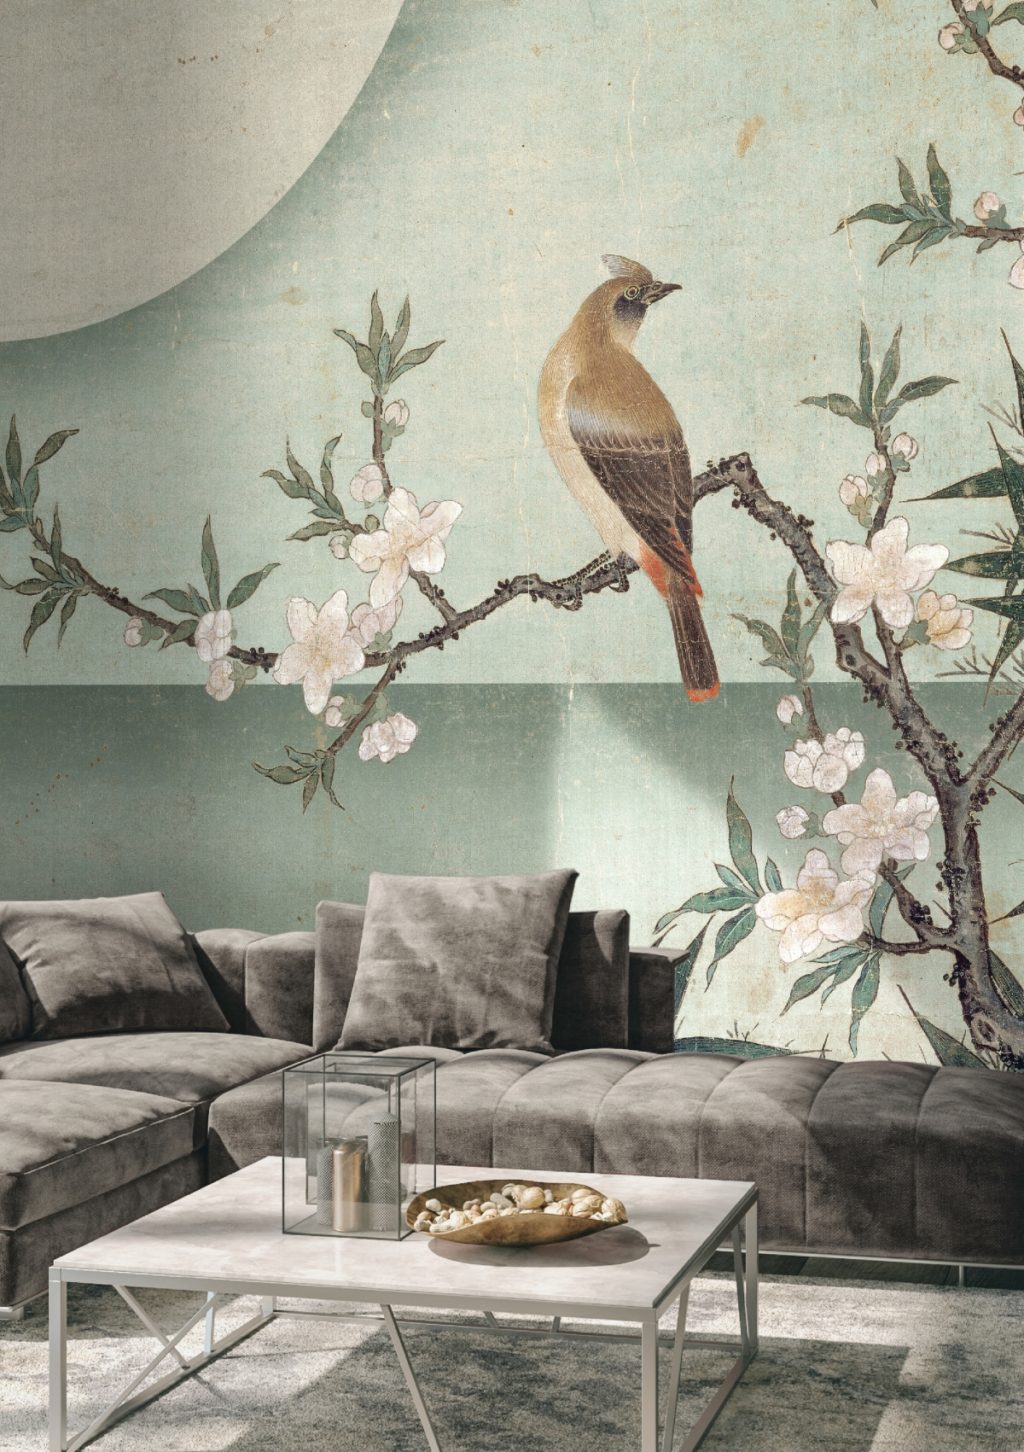 Design a living space with Wallpepper Bird on peach blossom AMB wallpaper